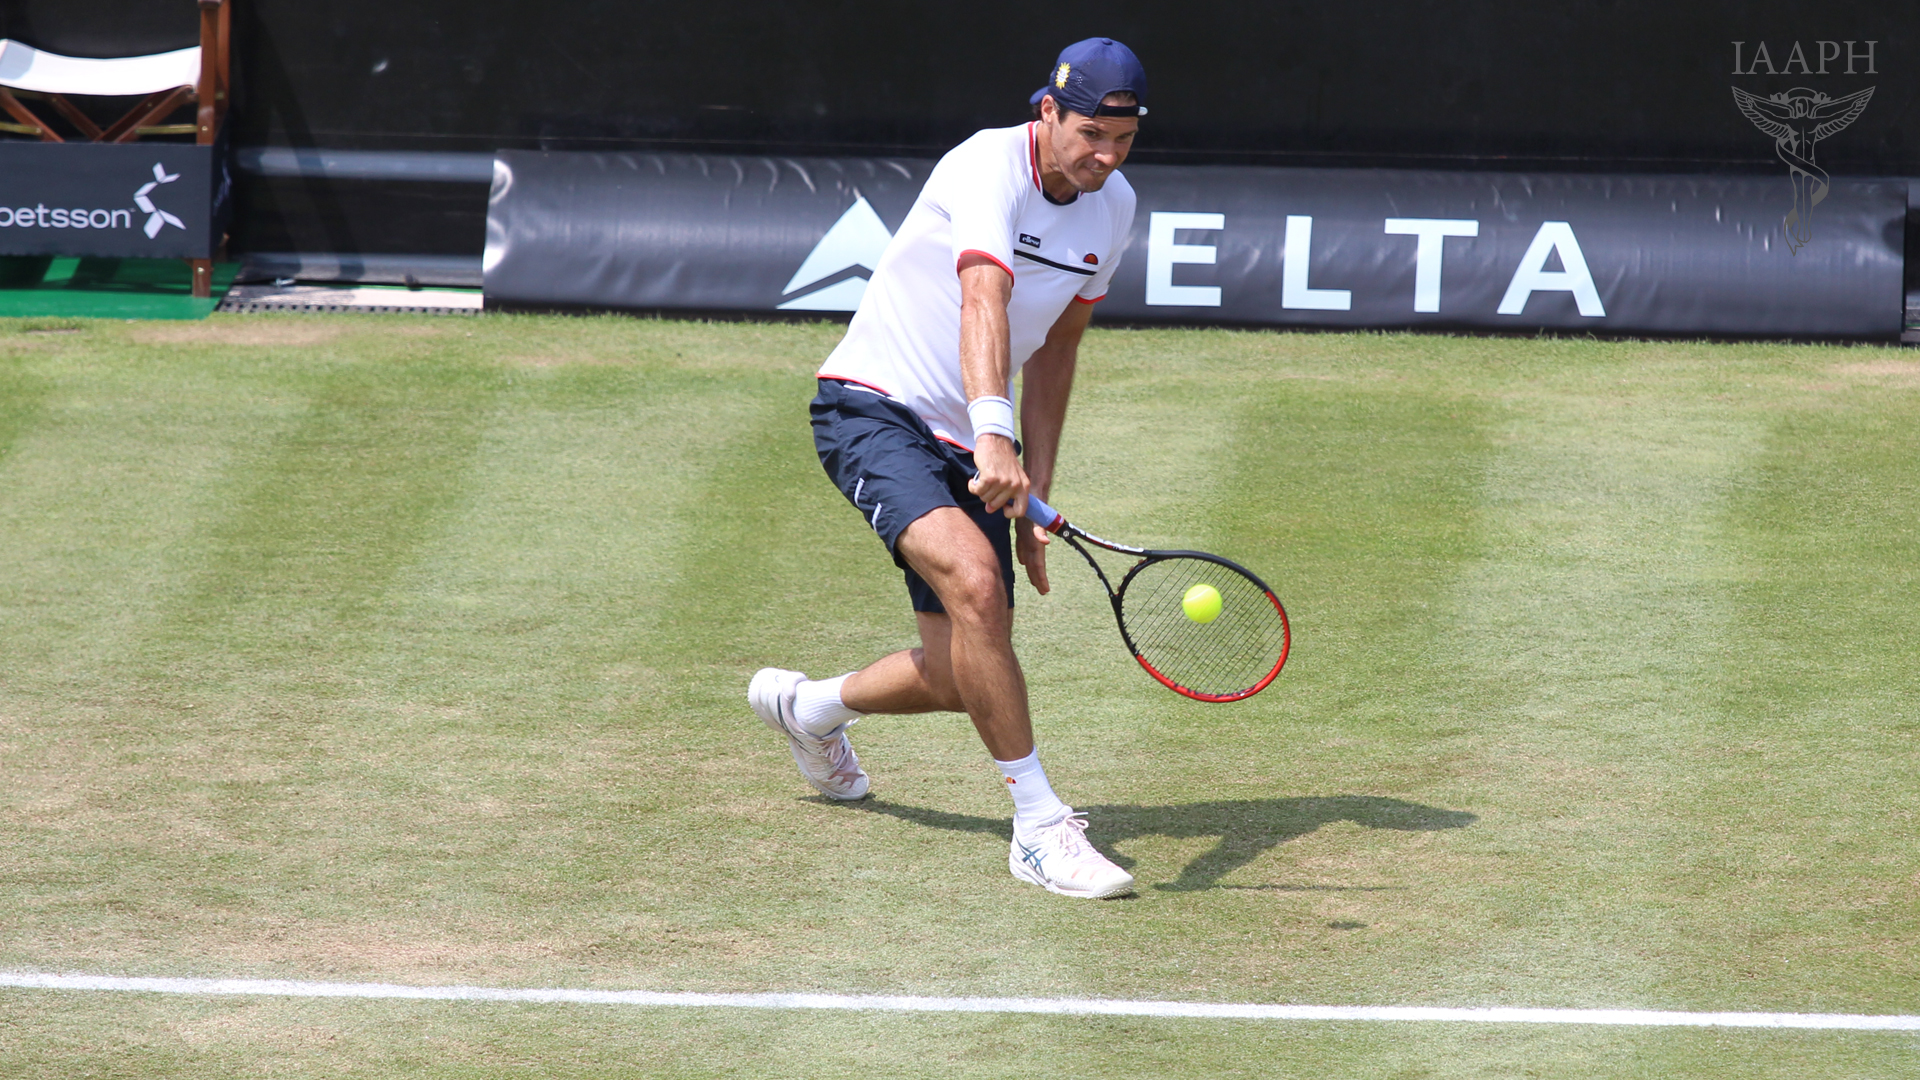 Tommy Haas backhand groundstroke on a grass court